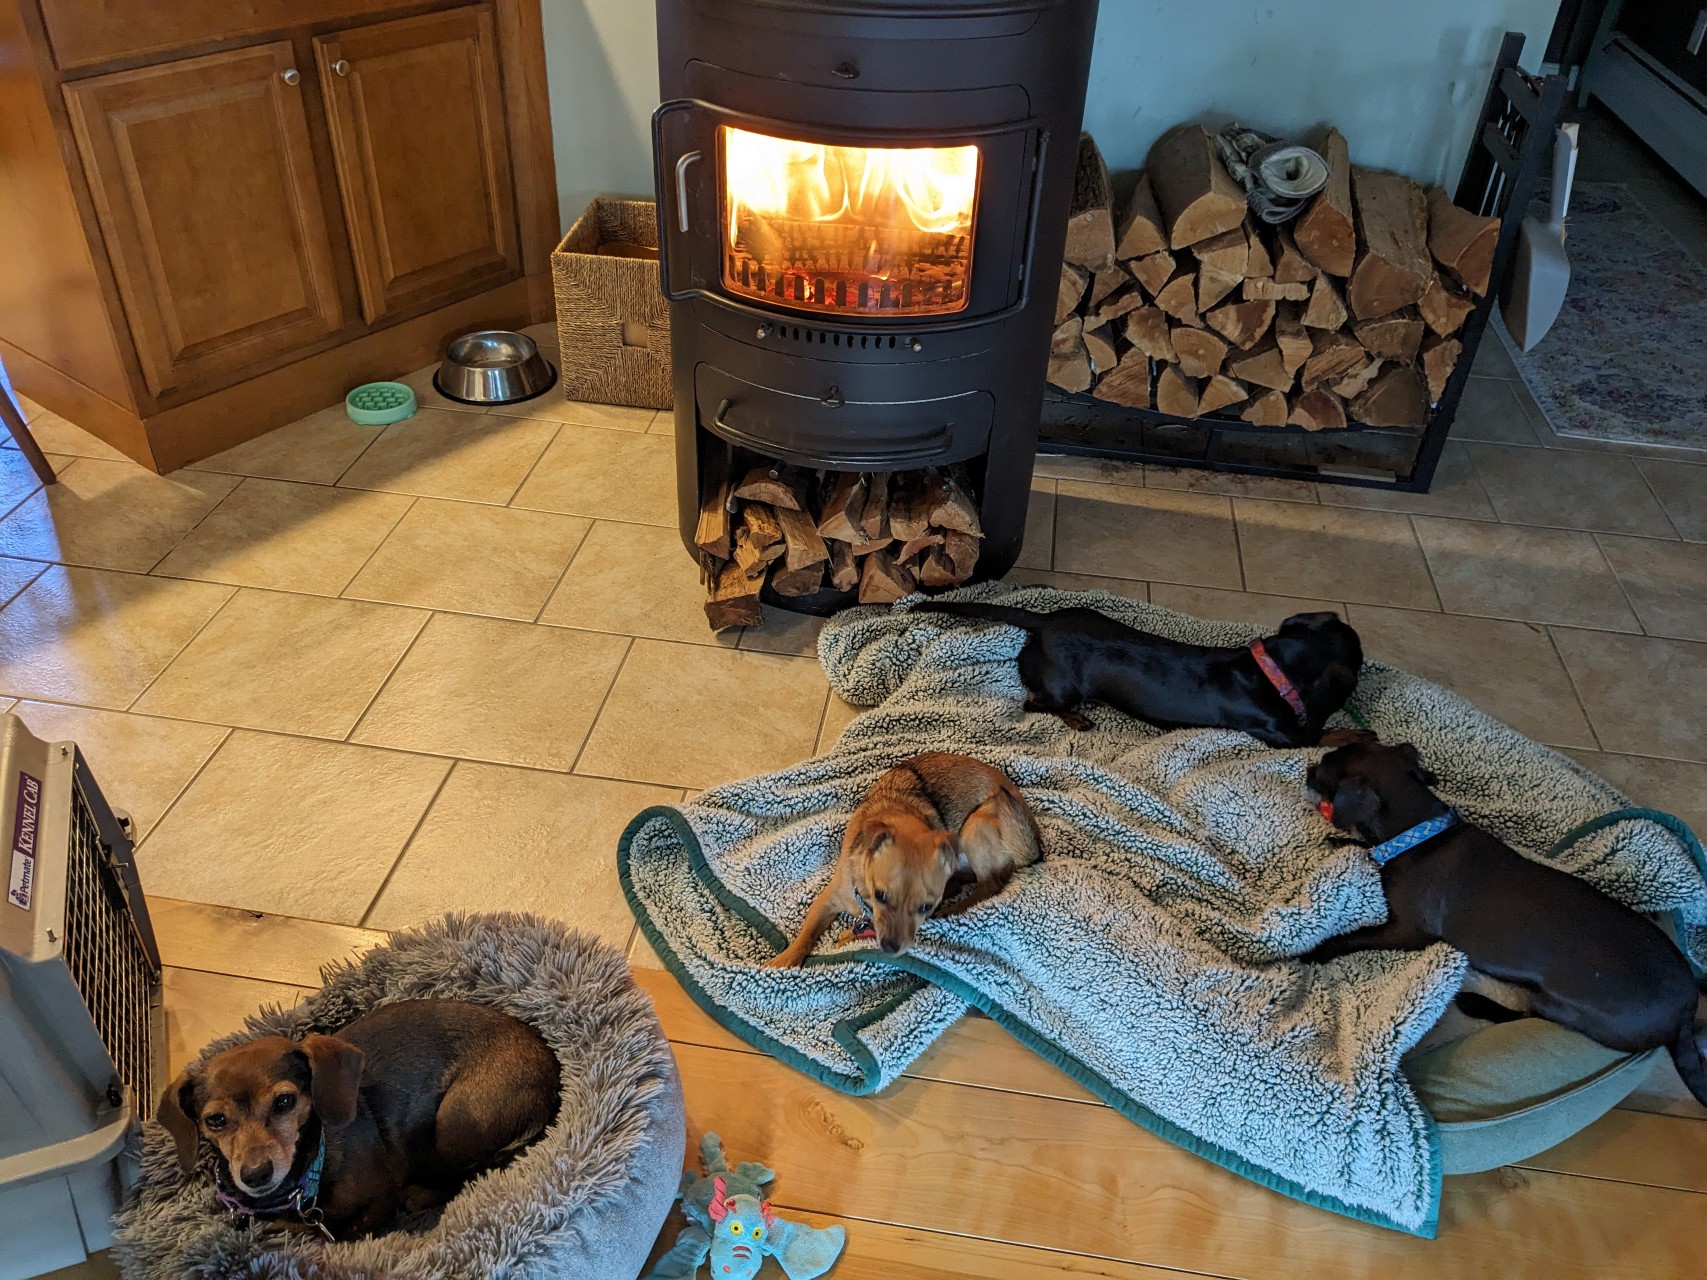 Four small dogs on beds and blankets in front of a wood stove